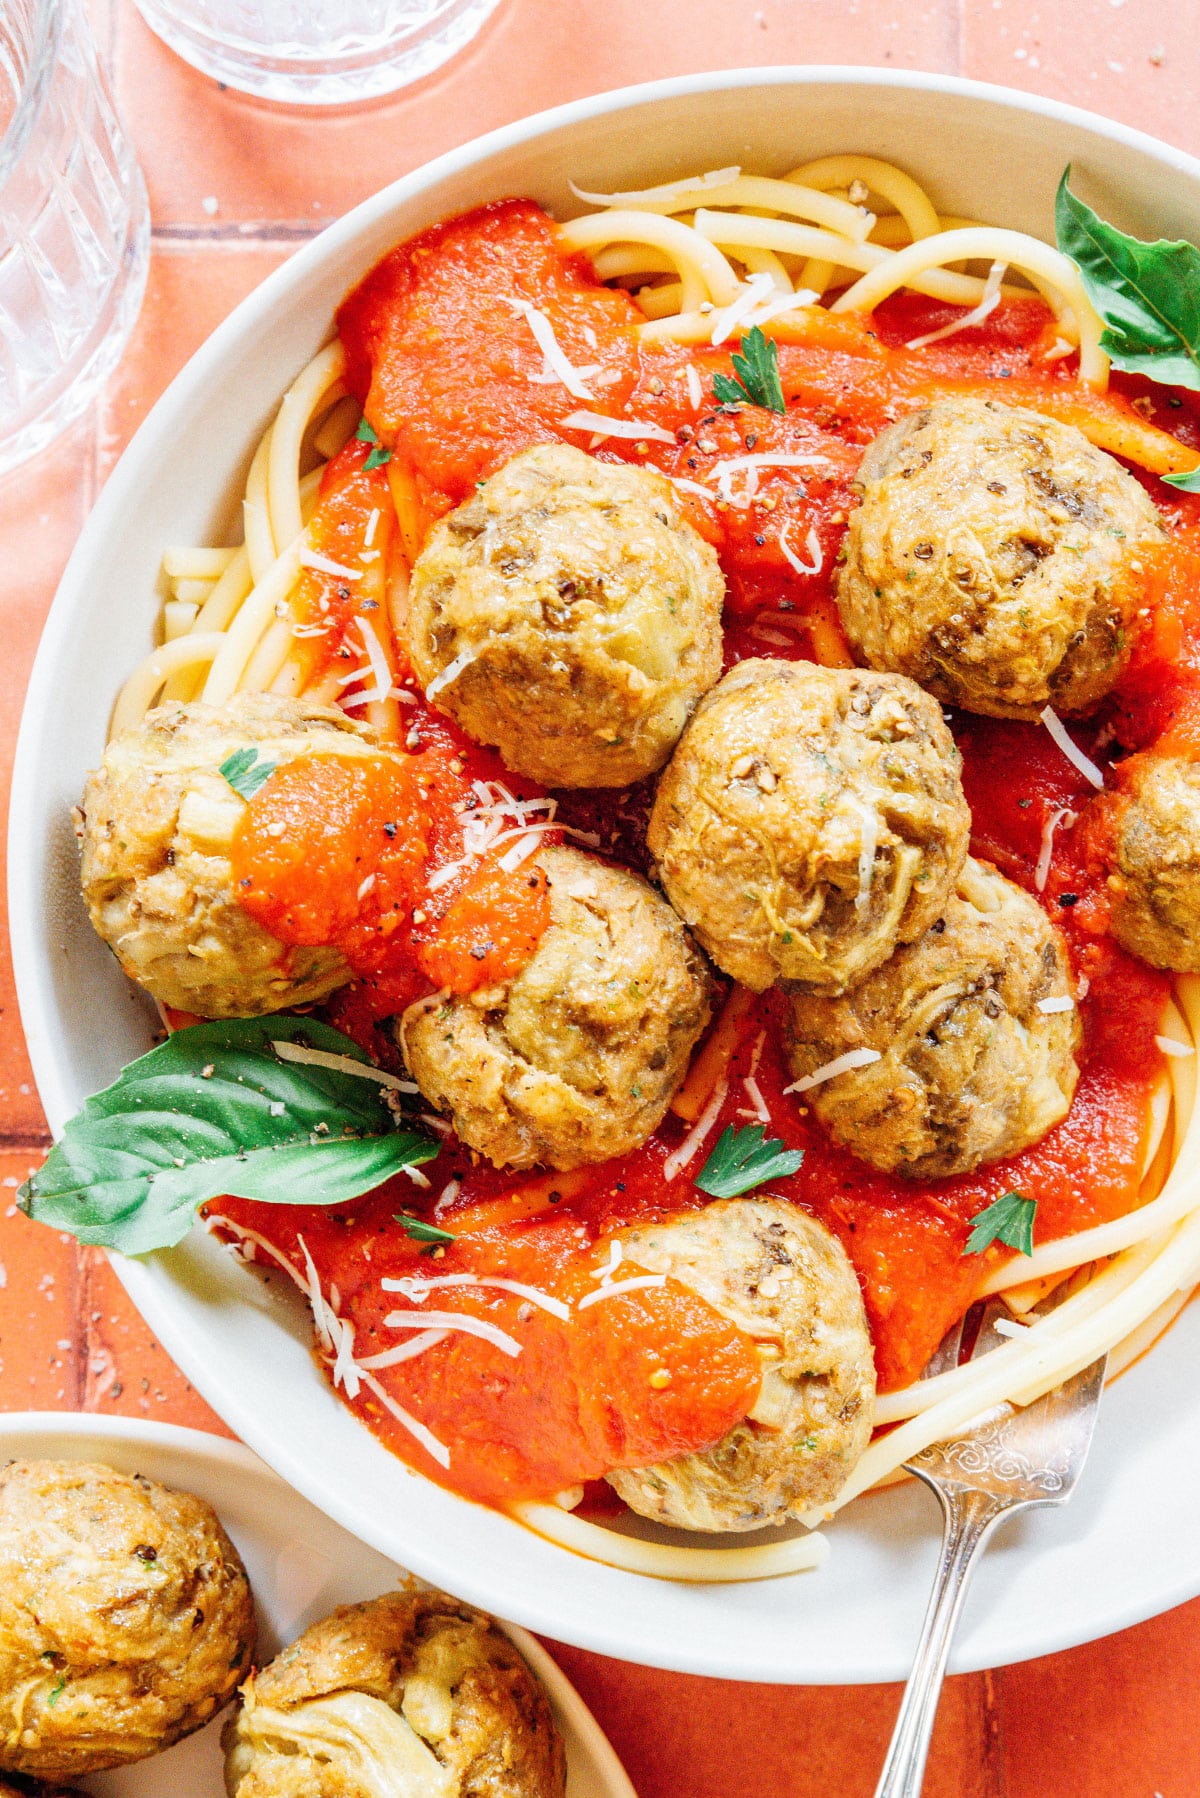 Baked vegetarian meatballs on top of a bowl of spaghetti.